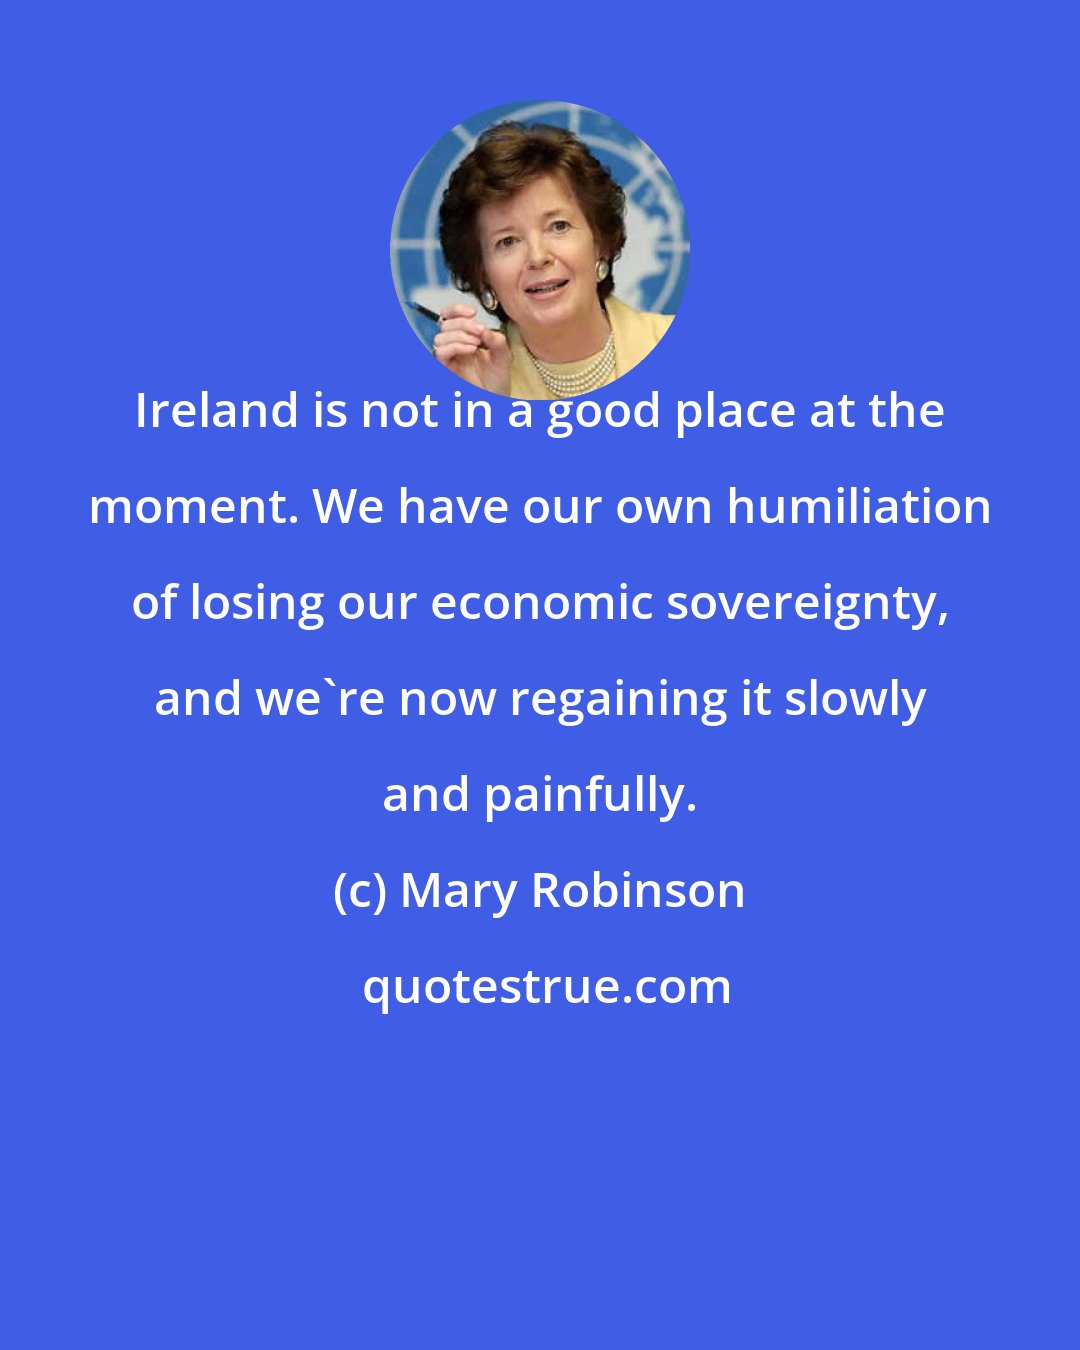 Mary Robinson: Ireland is not in a good place at the moment. We have our own humiliation of losing our economic sovereignty, and we're now regaining it slowly and painfully.